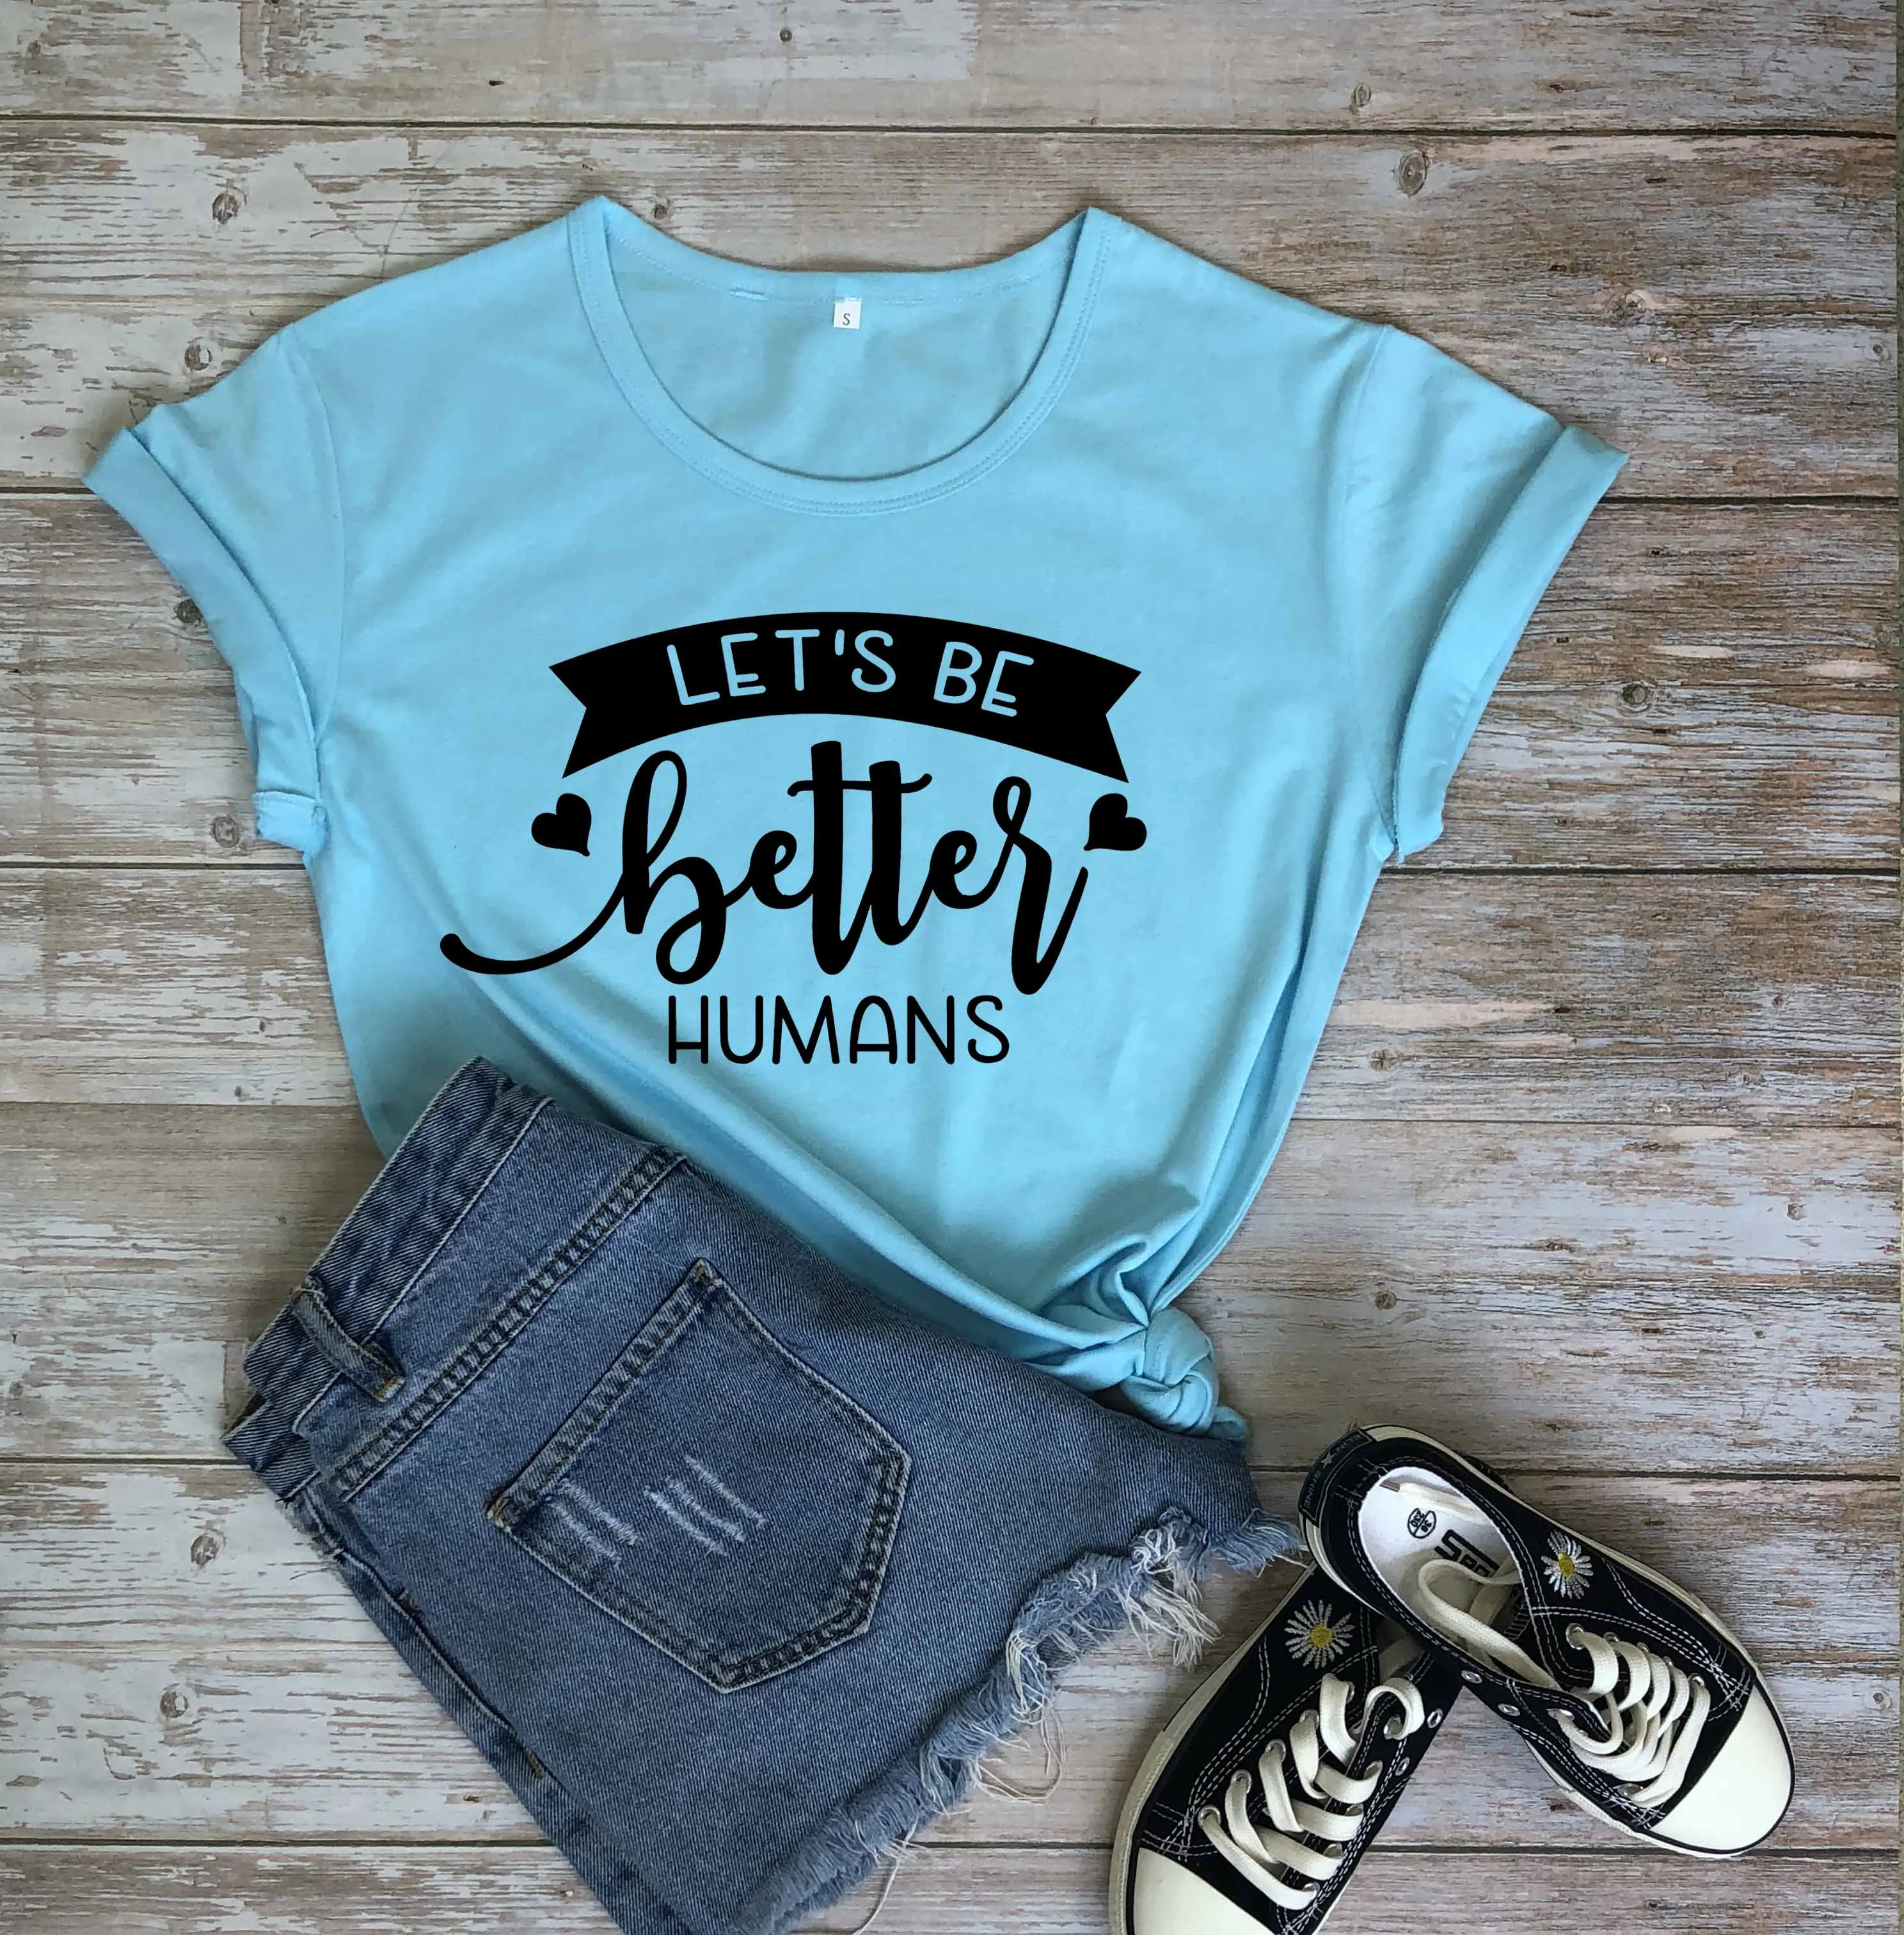 

Let's Be Better Humans slogan religion women fashion pure cotton casual aesthetic tumblr young quote t shirt Christian tees tops